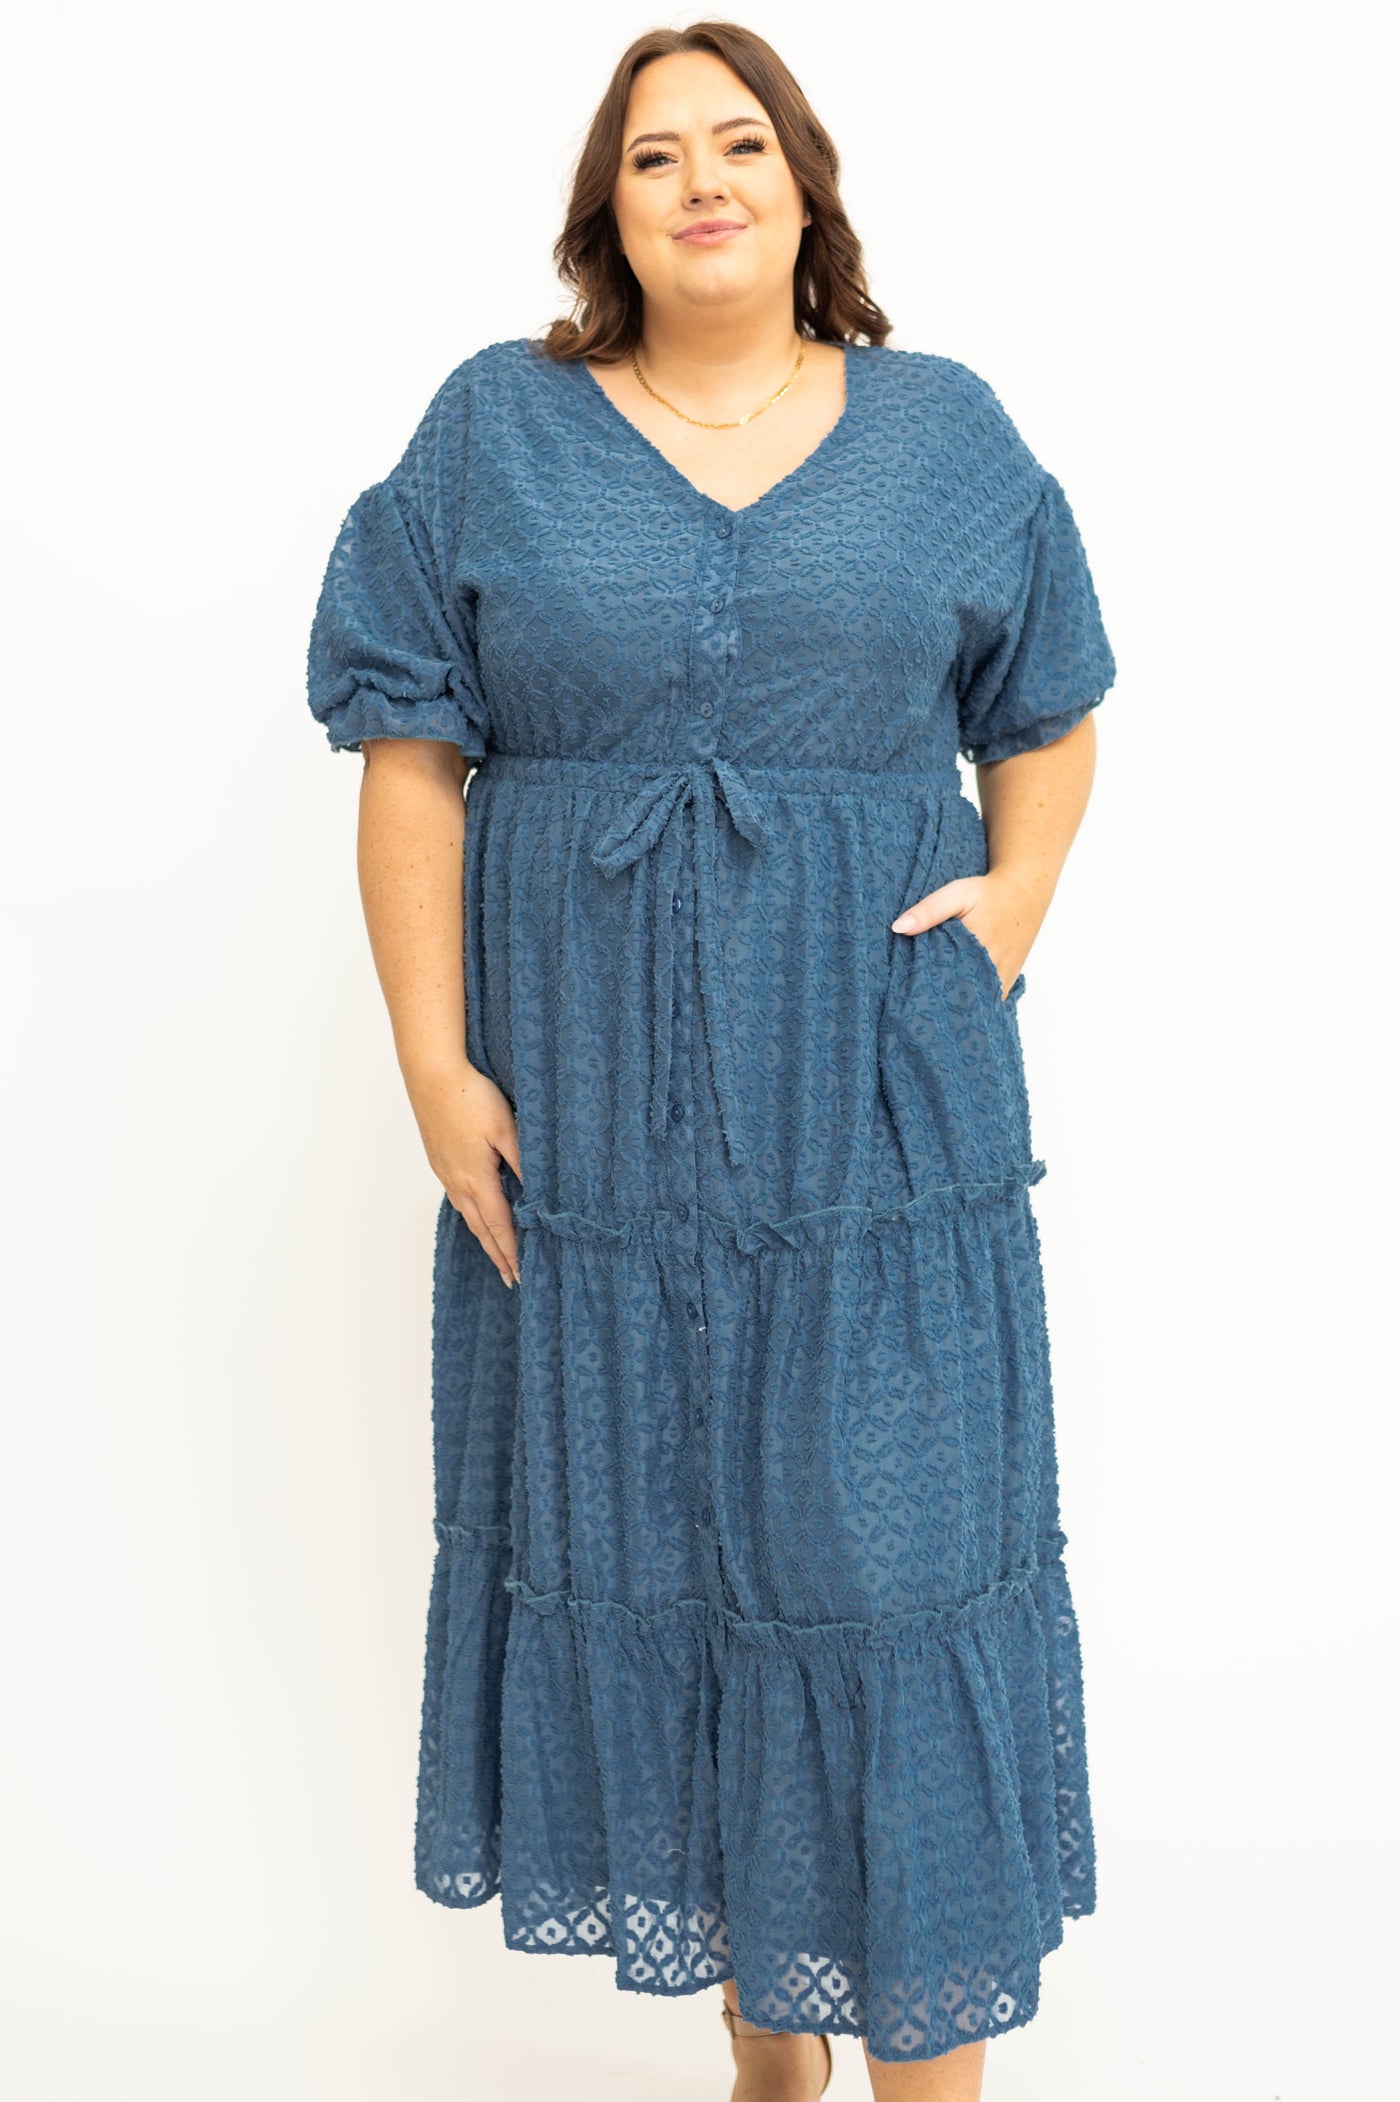 Short sleeve plus size denim blue dress with tiered skirt